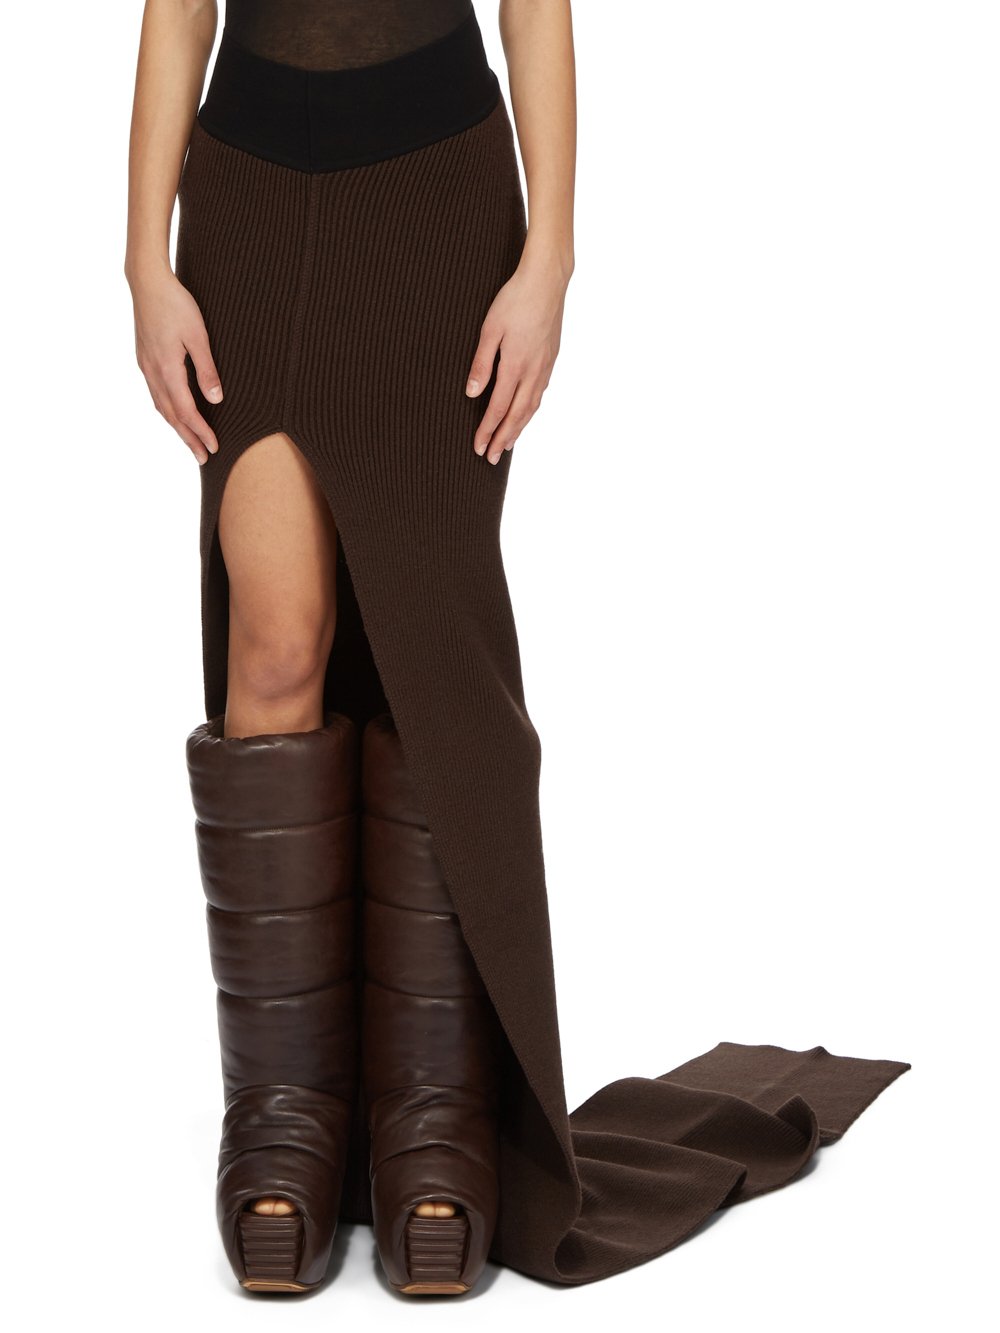 RICK OWENS FW23 LUXOR RUNWAY KNT EDFU SKIRT IN BROWN AND BLACK HEAVY RIB RECYCLED CASHMERE